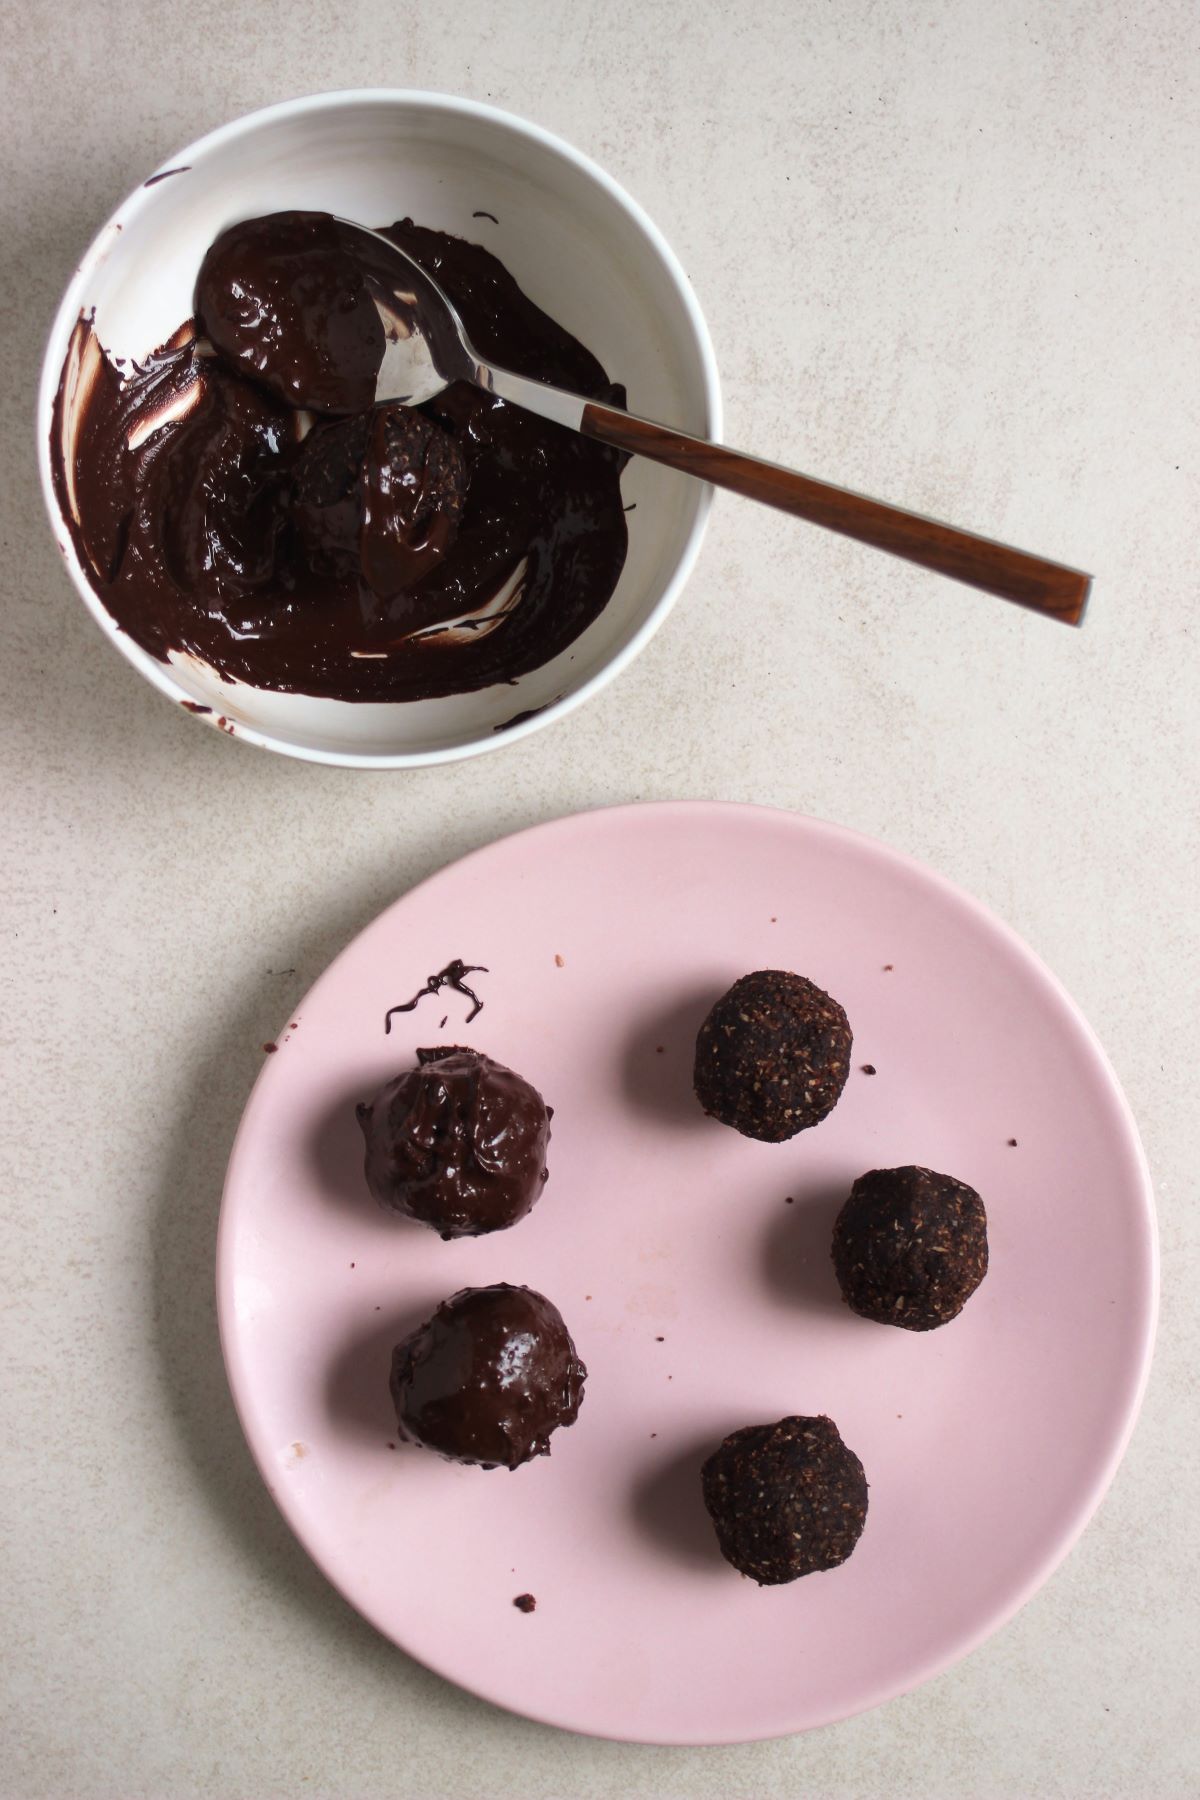 Chocolate peanut butter balls on a pink plate, two with chocolate coating. Another bowl with melted chocolate and a spoon.